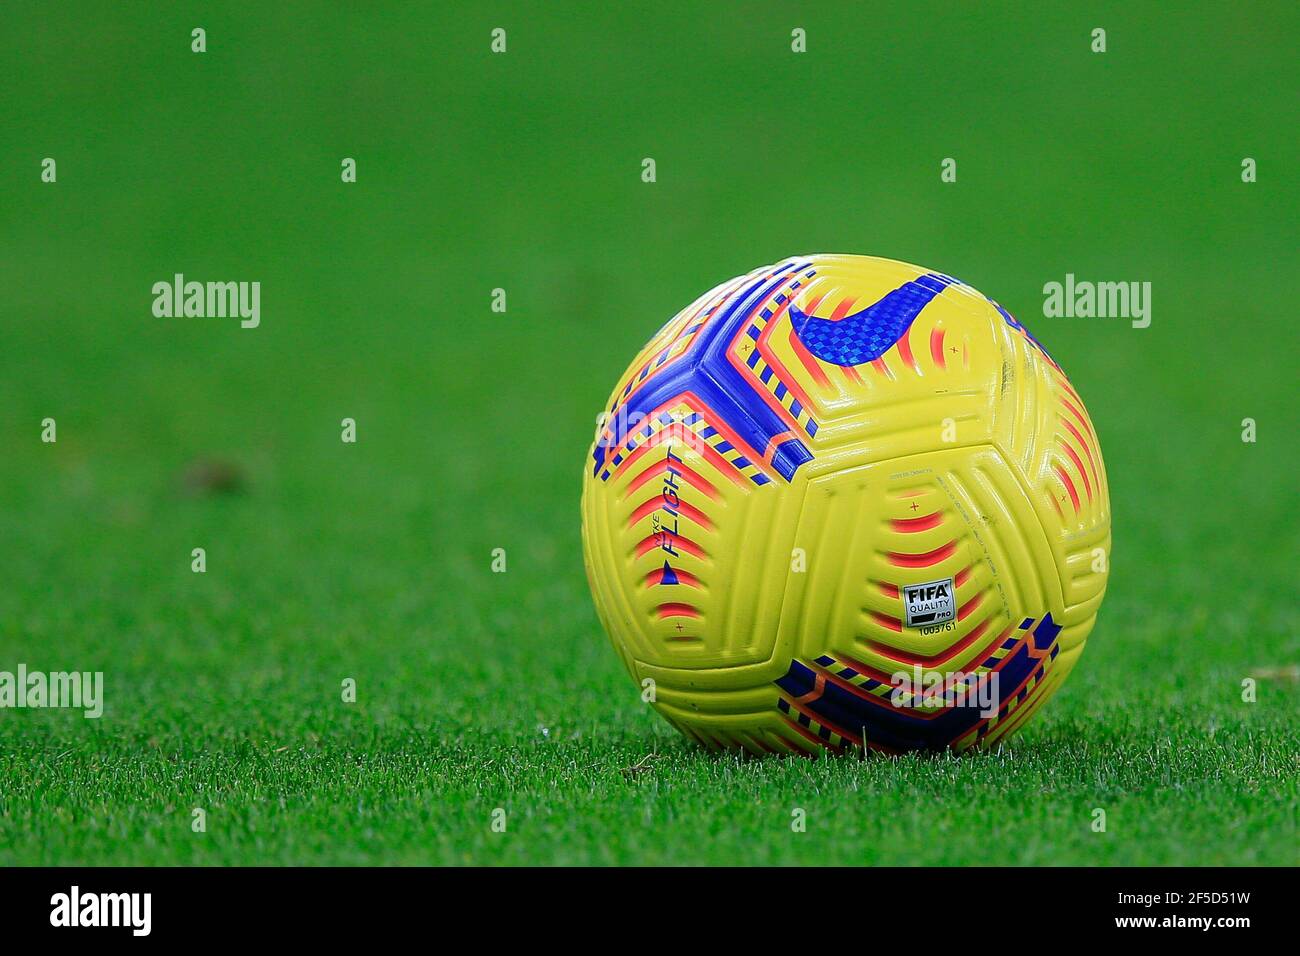 Nike Strike ball, the official football of the Premier League. Stock Photo